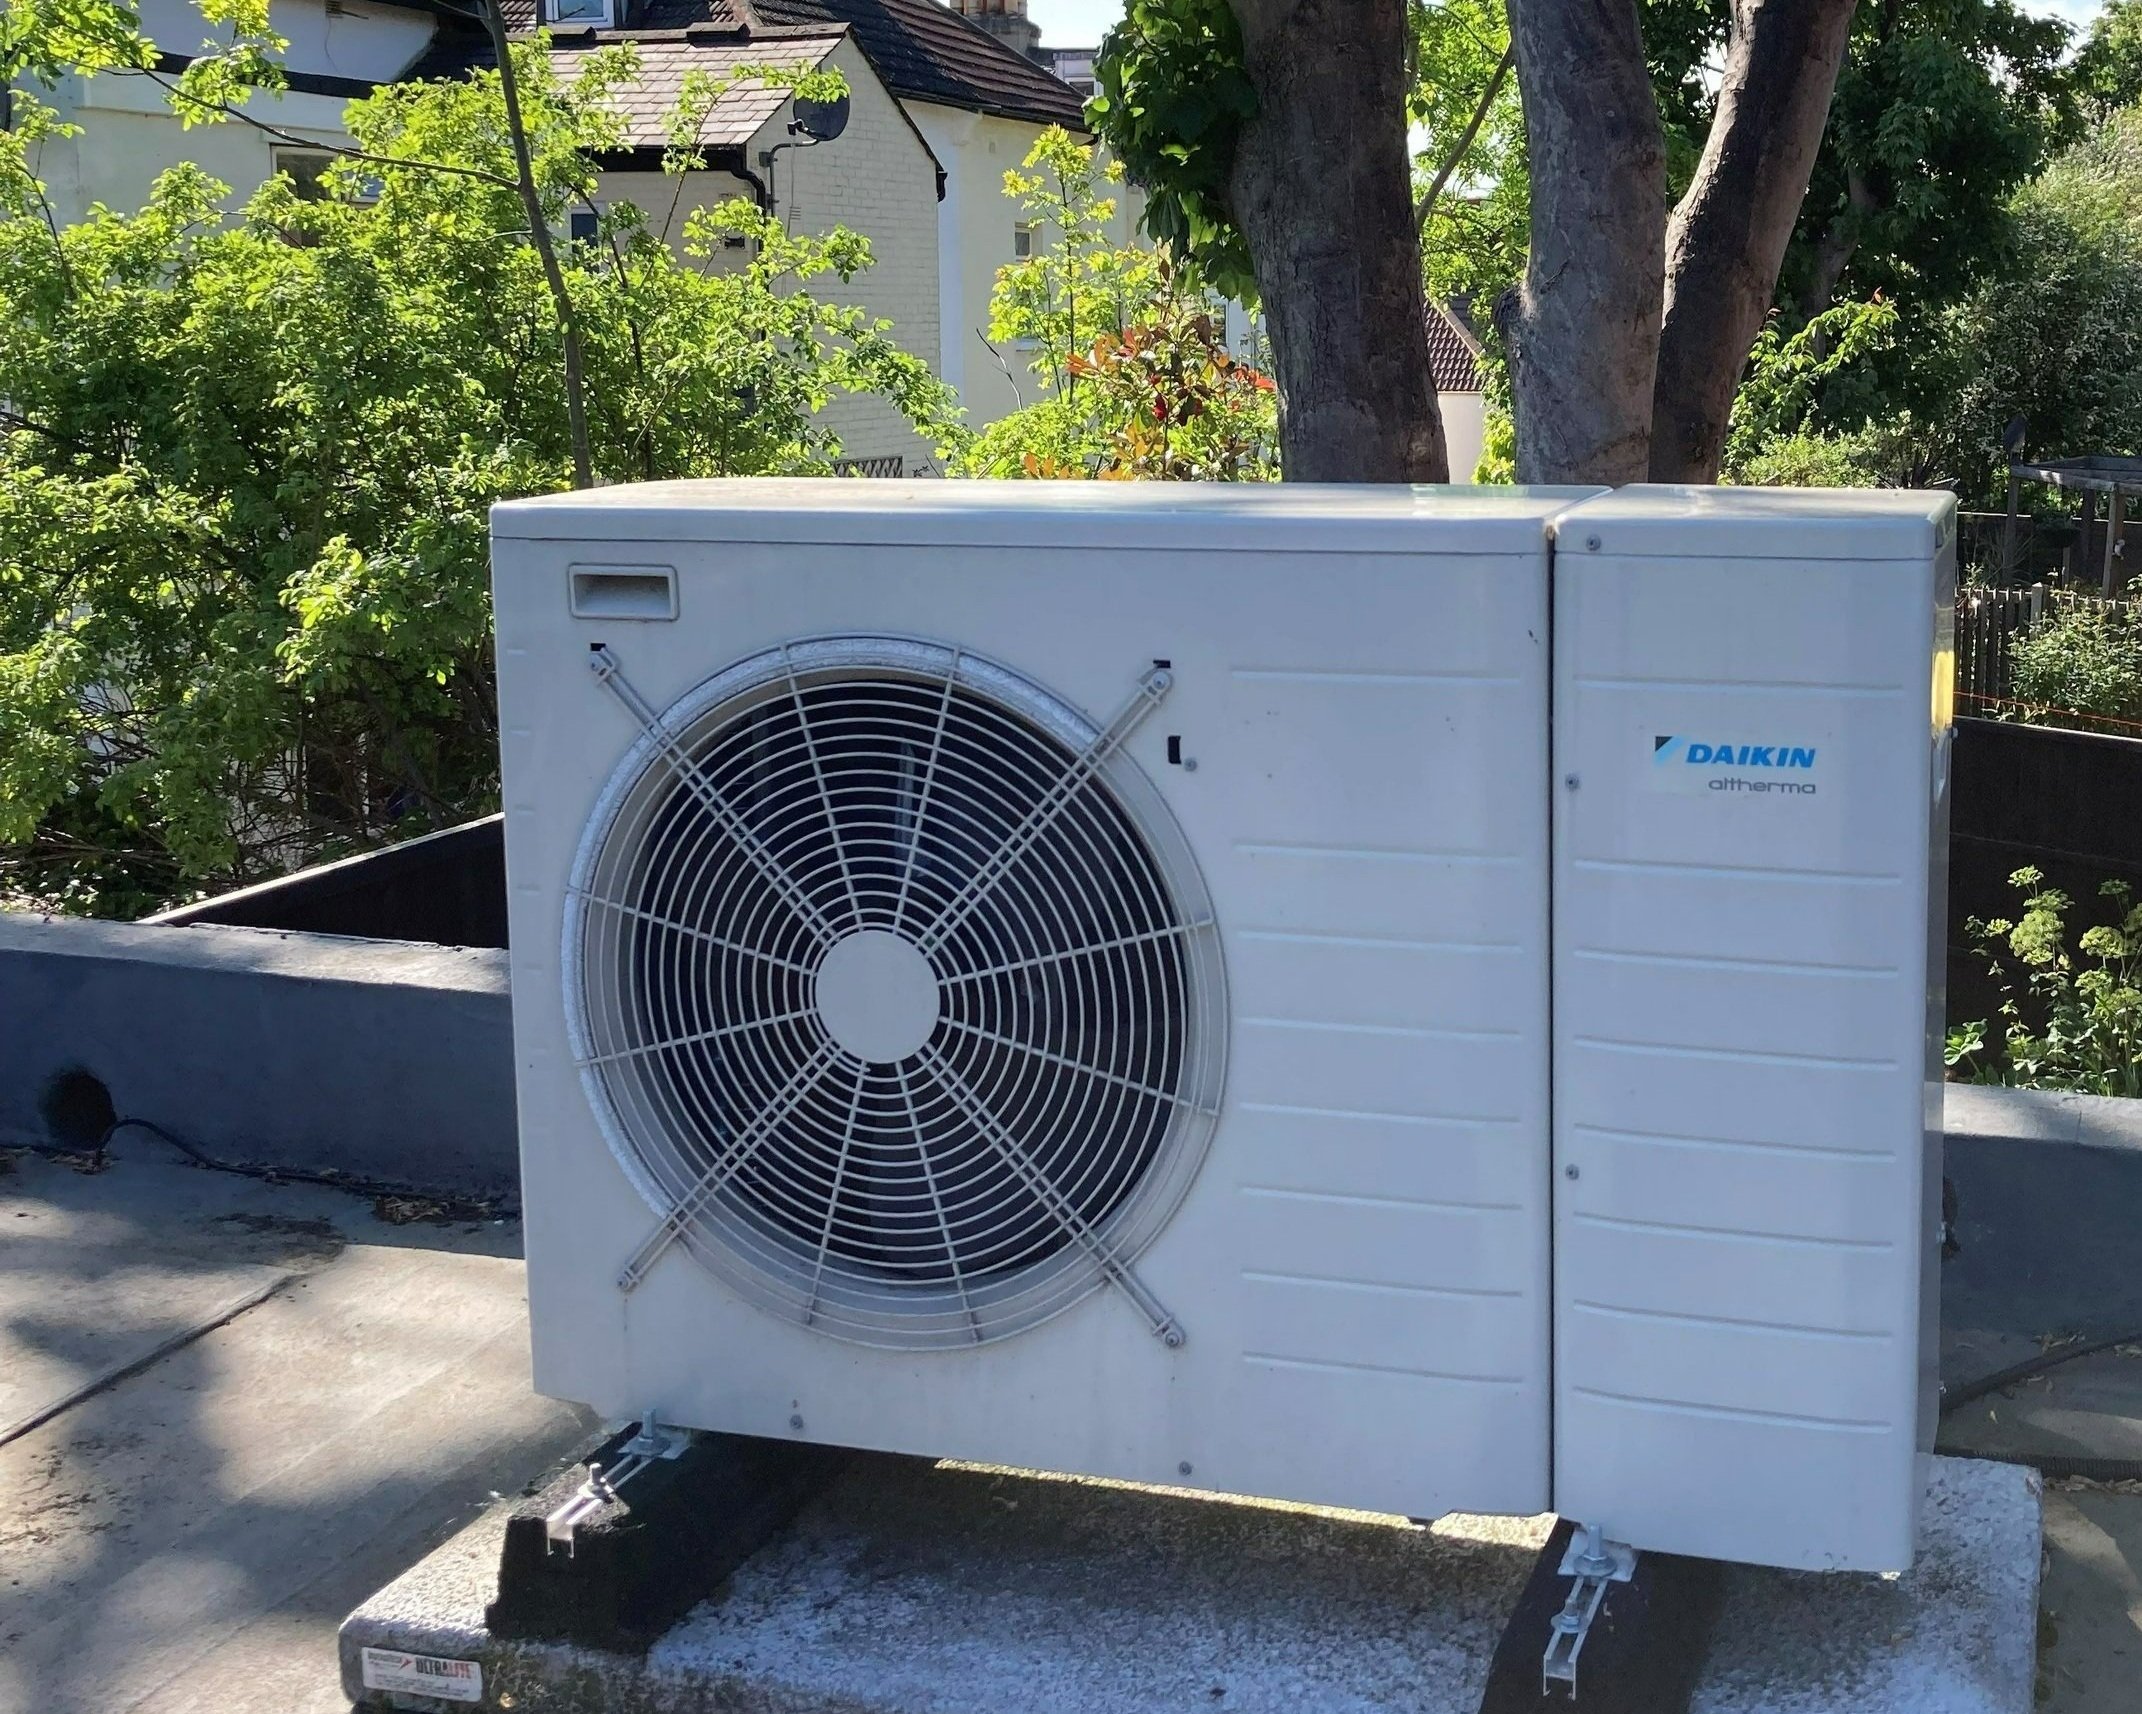 It's been brilliant': air source heat pump will recoup cost for owner, Money